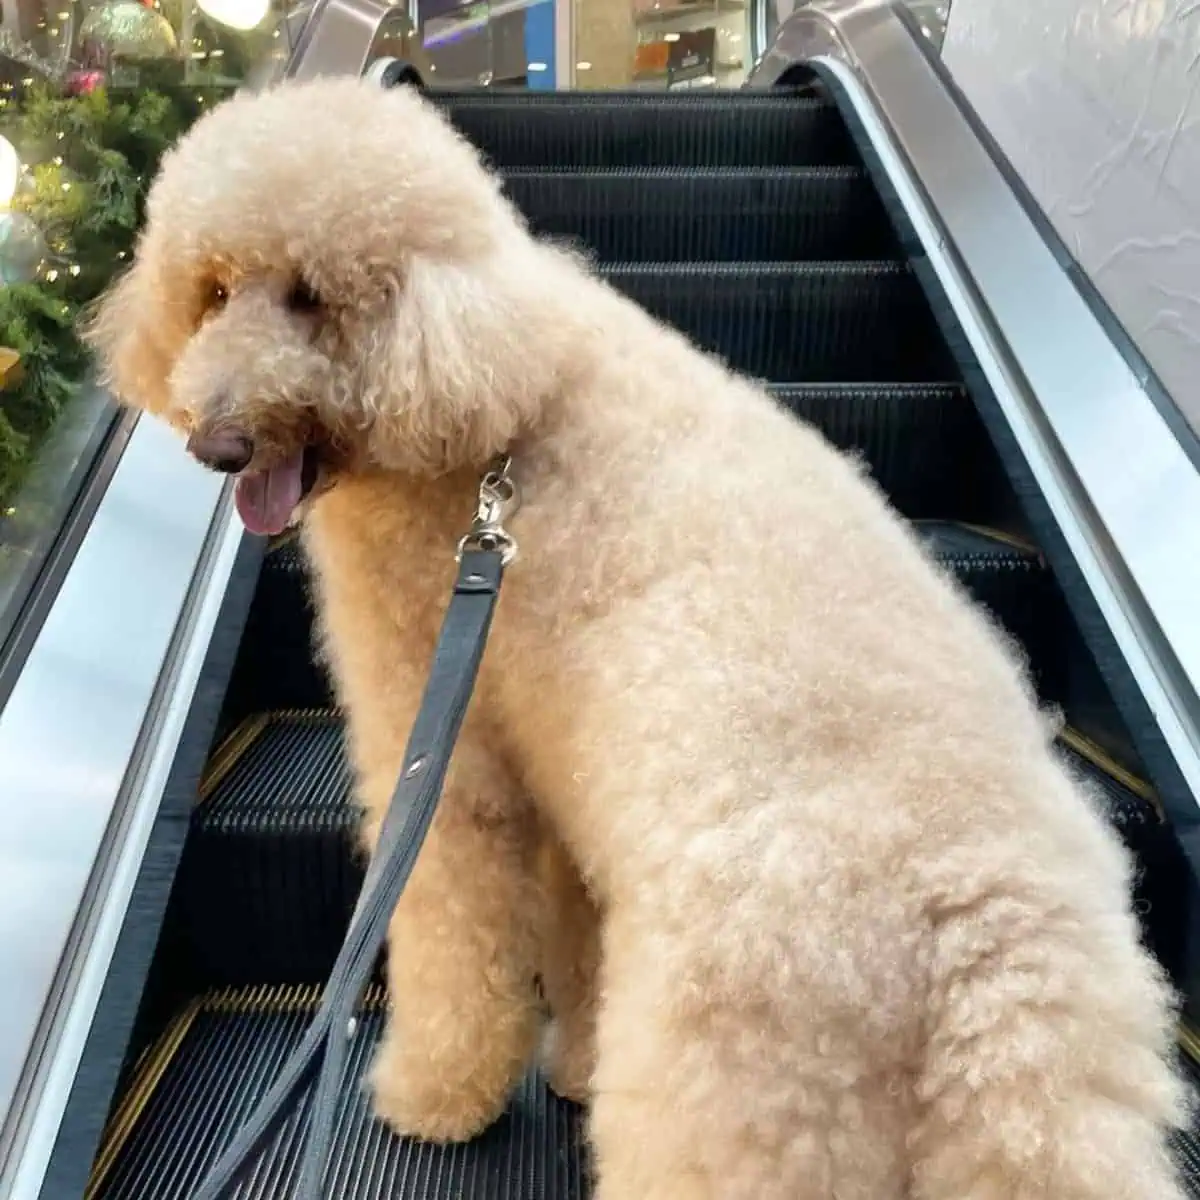 Standard Poodle on a holiday